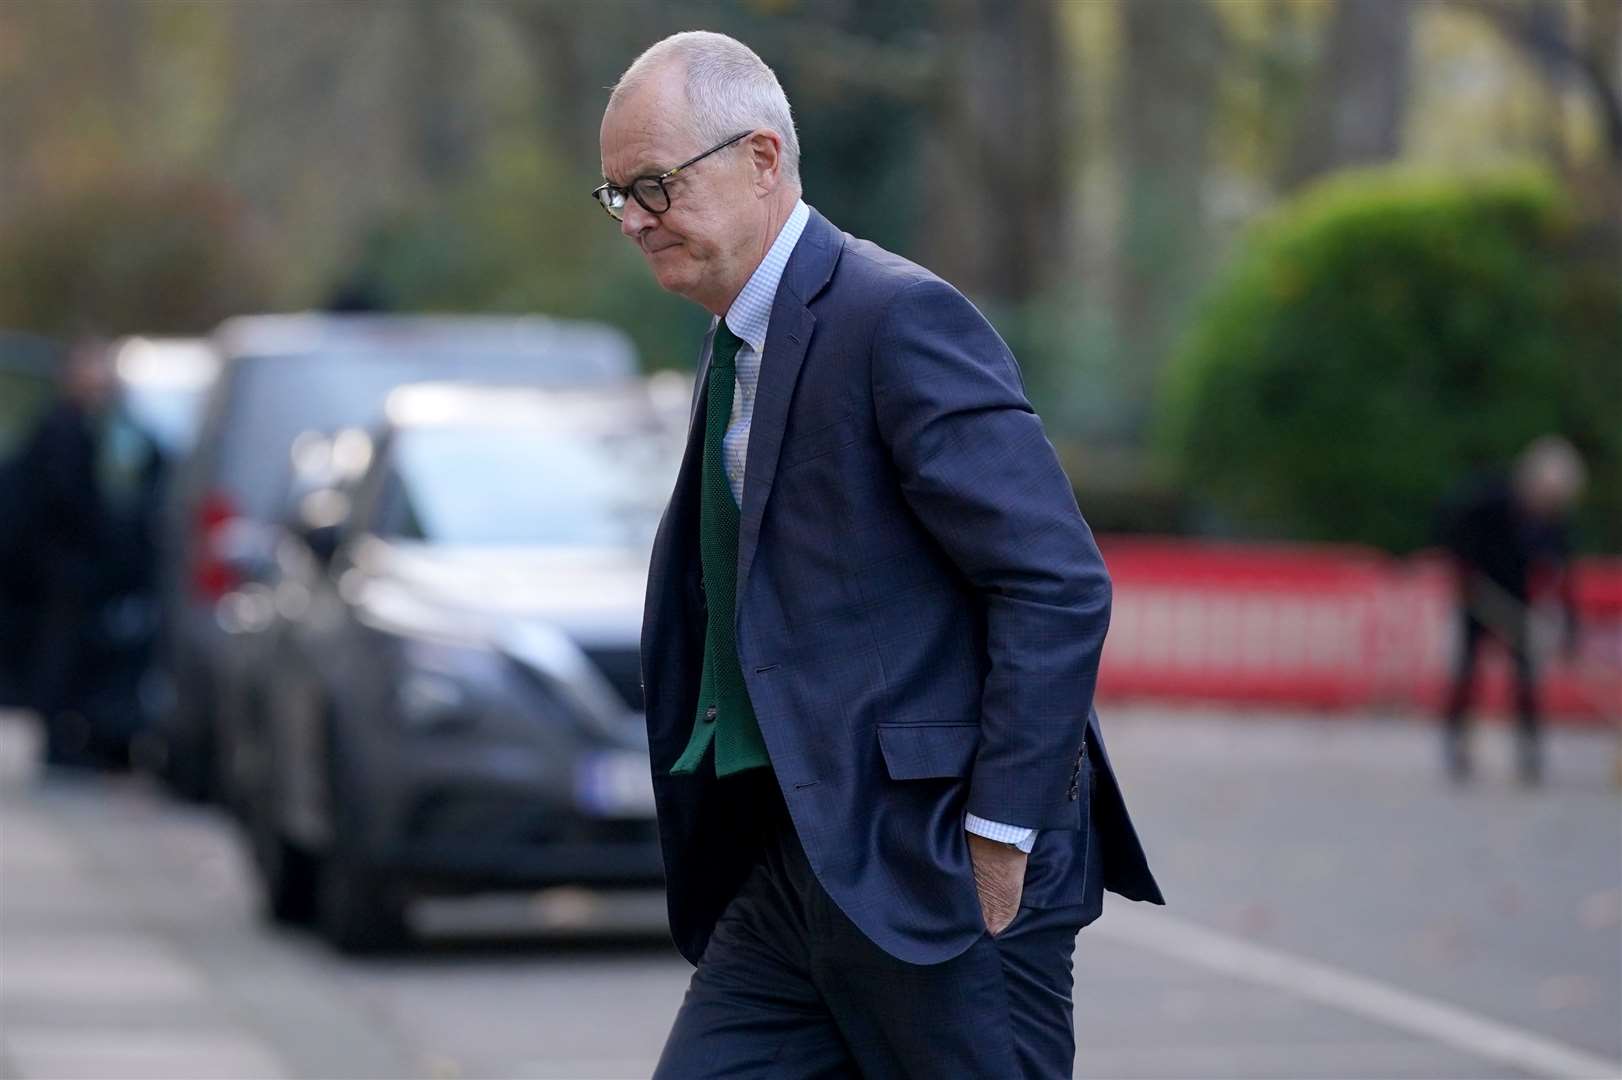 Former chief scientific adviser Sir Patrick Vallance had mentioned a reference to Rishi Sunak saying it was ‘OK’ to let people die of Covid (Lucy North/PA)